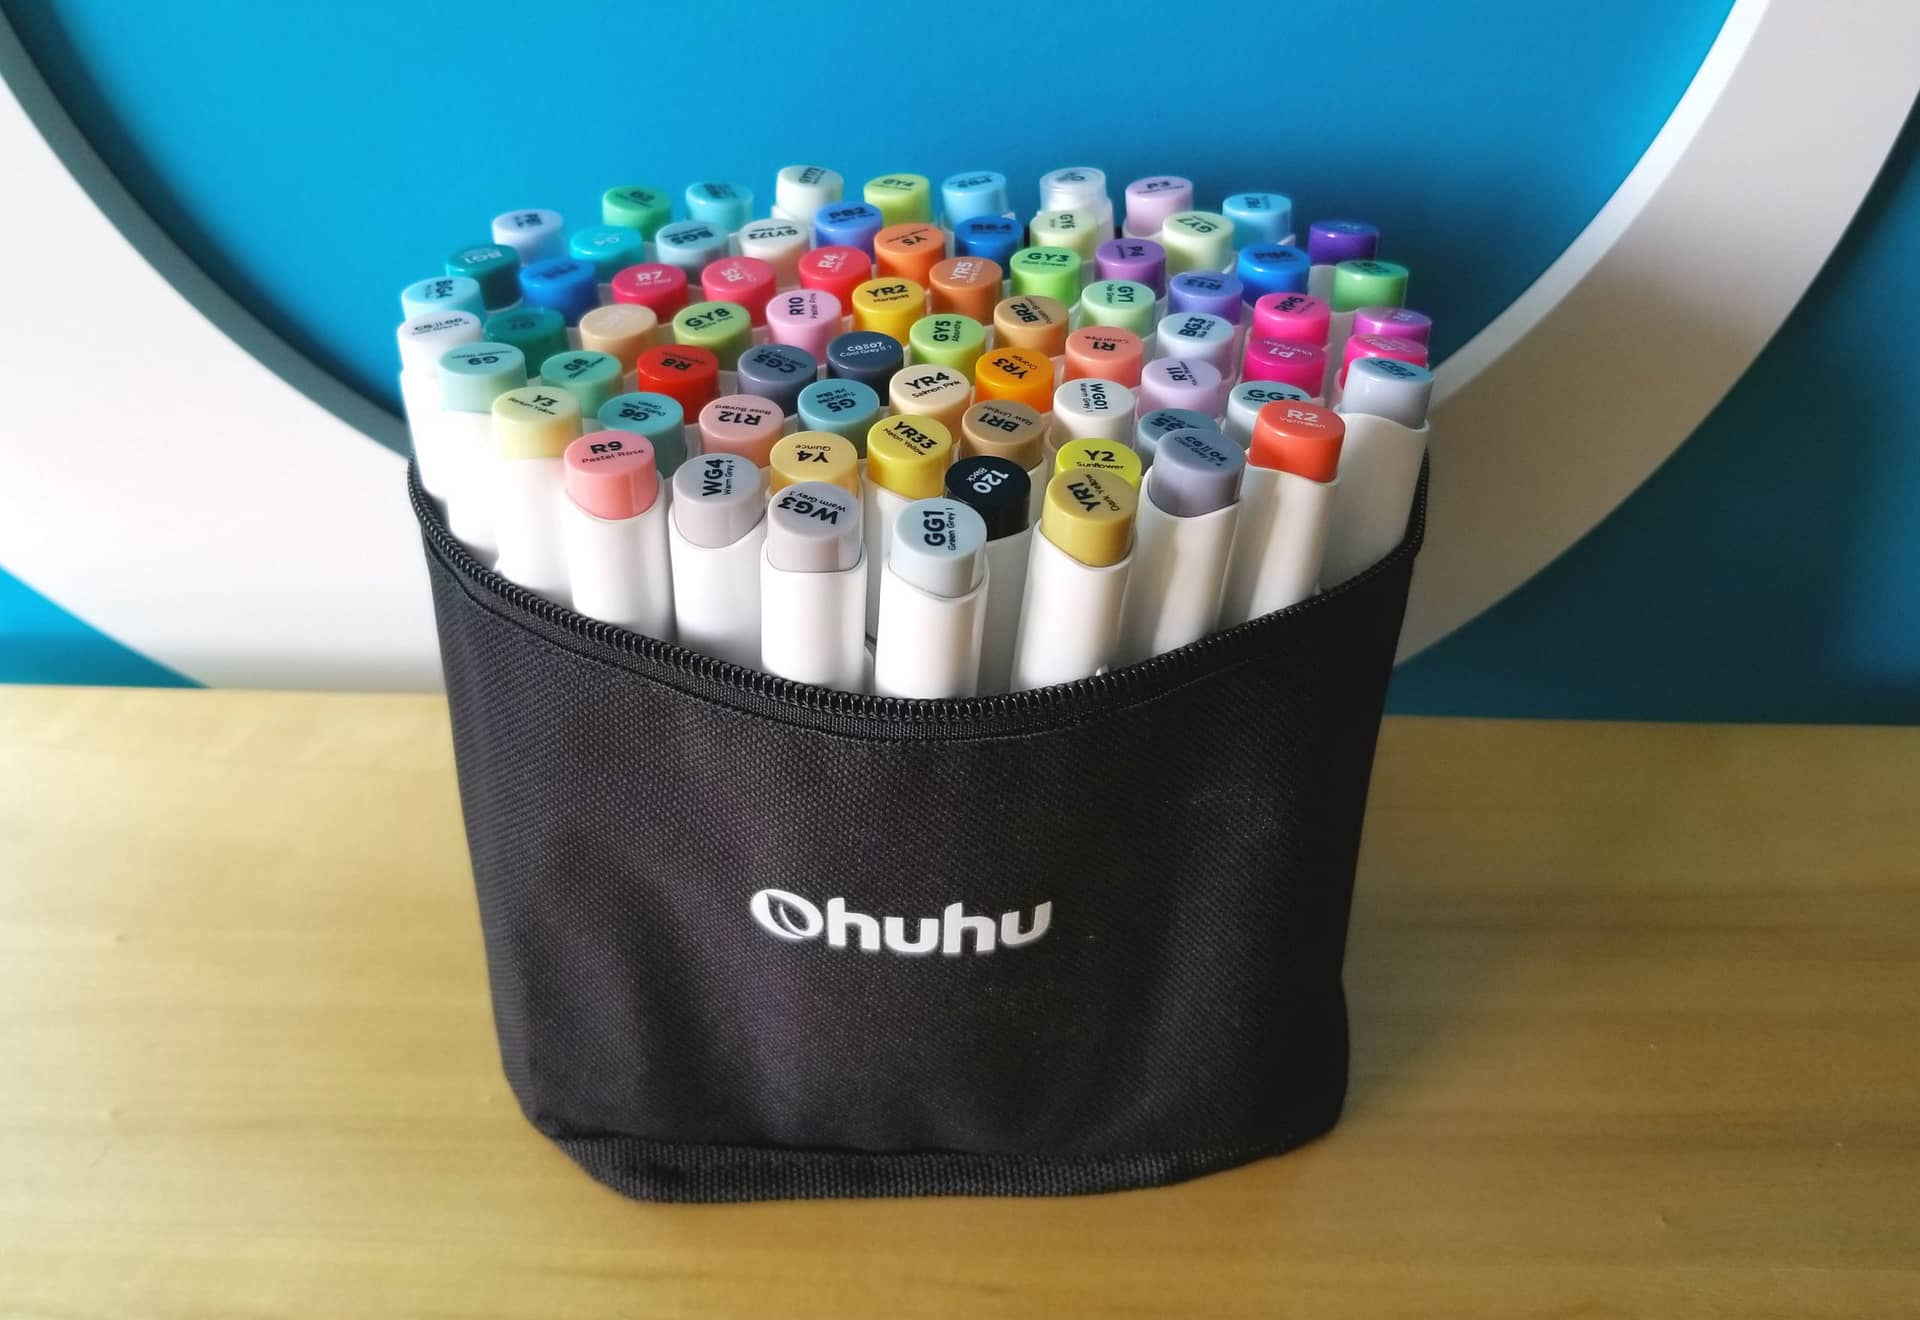 NEW Ohuhu Marker Sketchbook Review (and look at the new 120 alcohol brush  marker set!) 